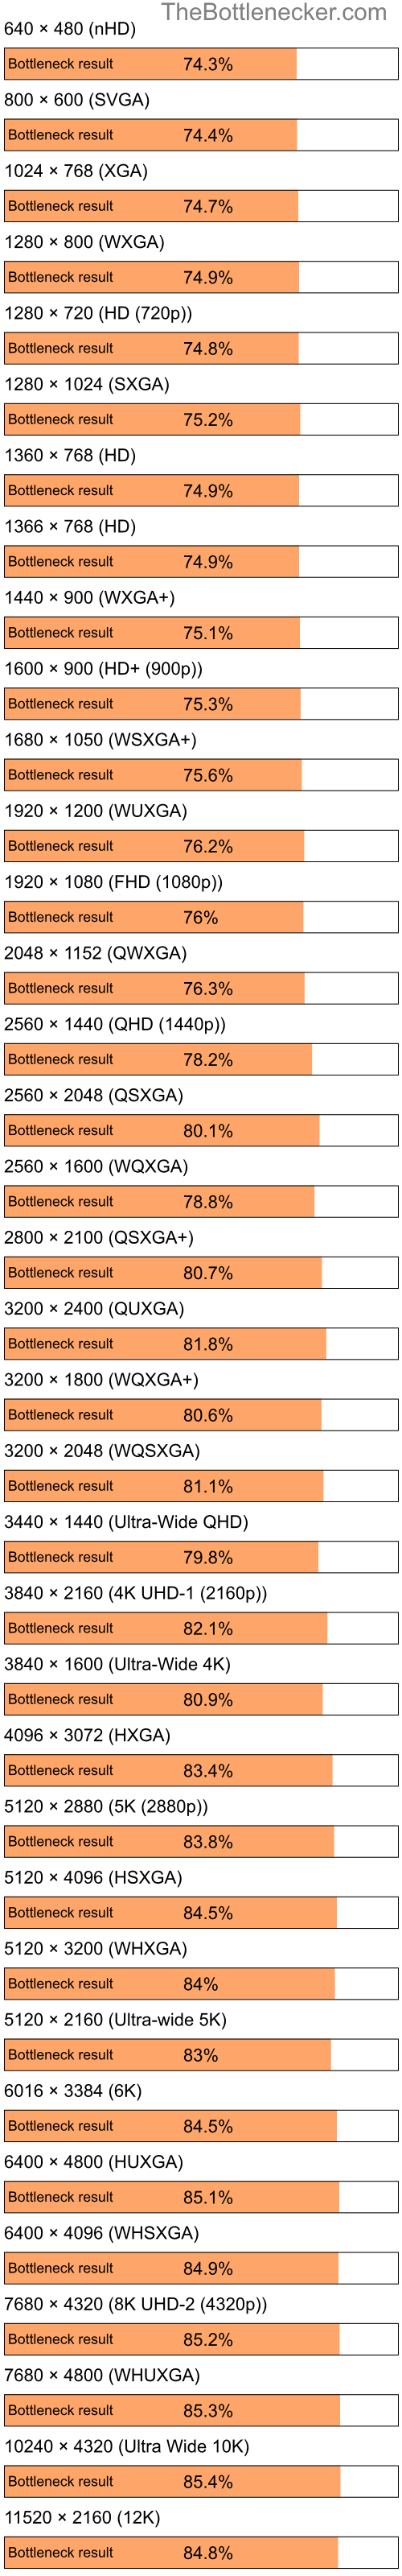 Bottleneck results by resolution for Intel Atom Z520 and AMD Radeon 9600 Family in Processor Intense Tasks